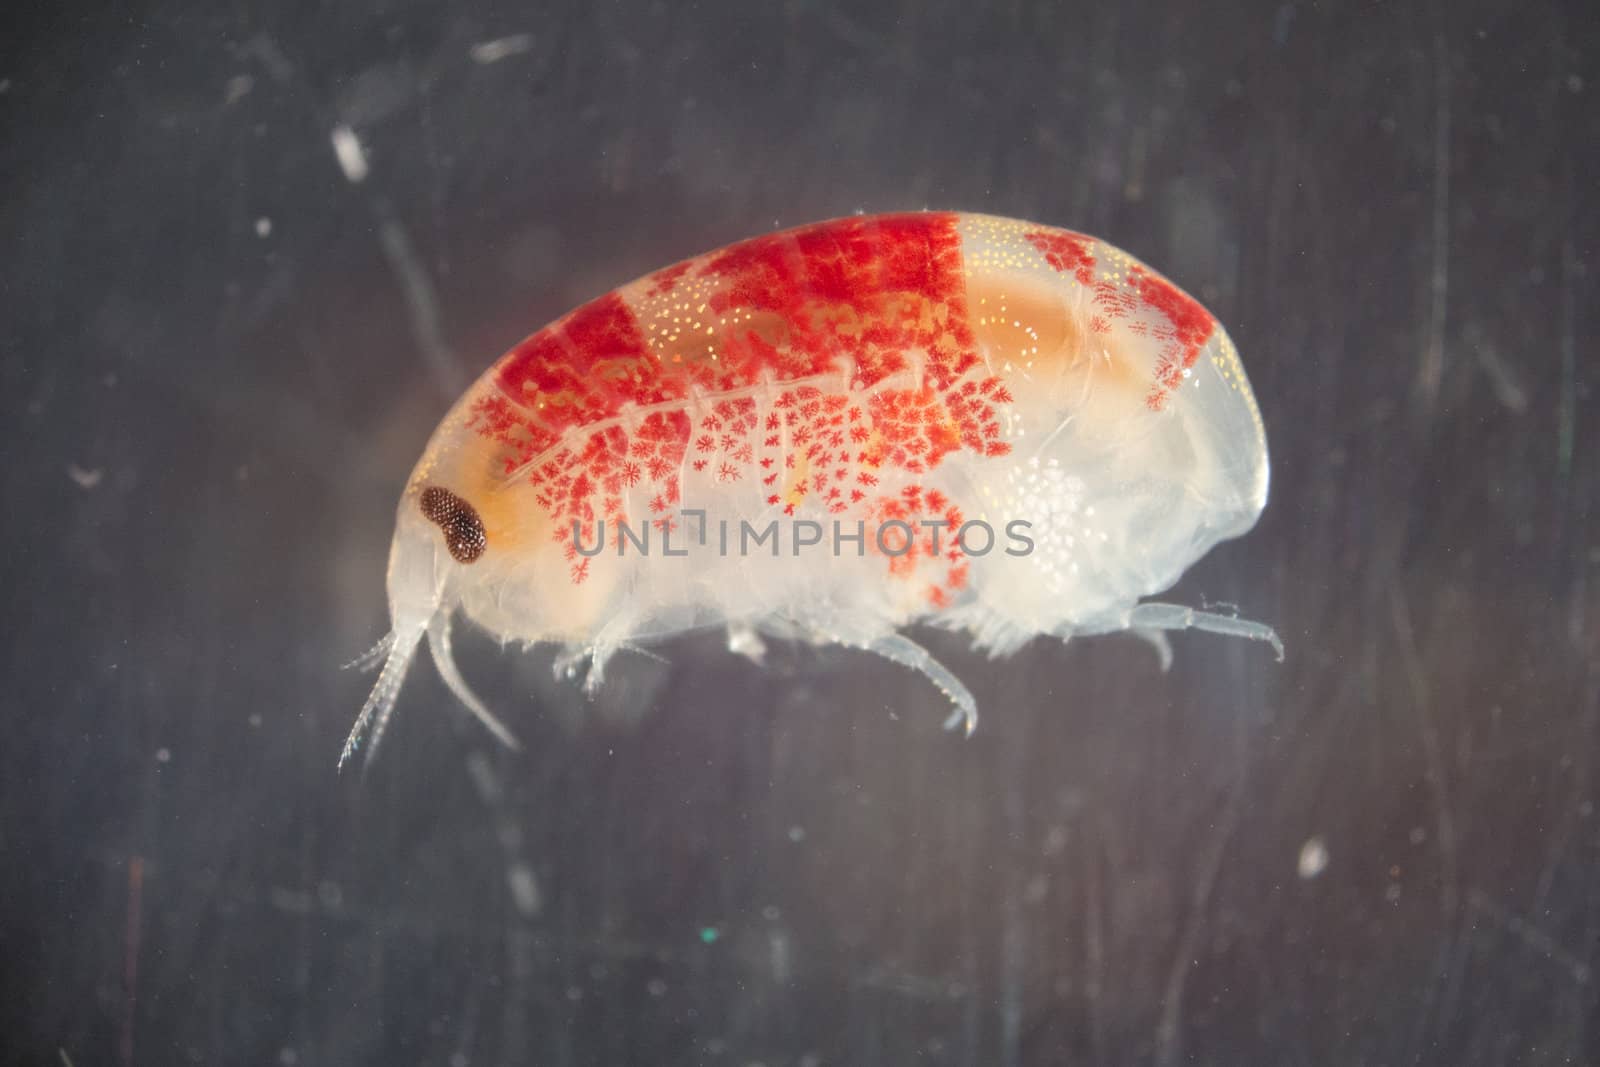 Amphipod from the waters around Disko Island in Greenland